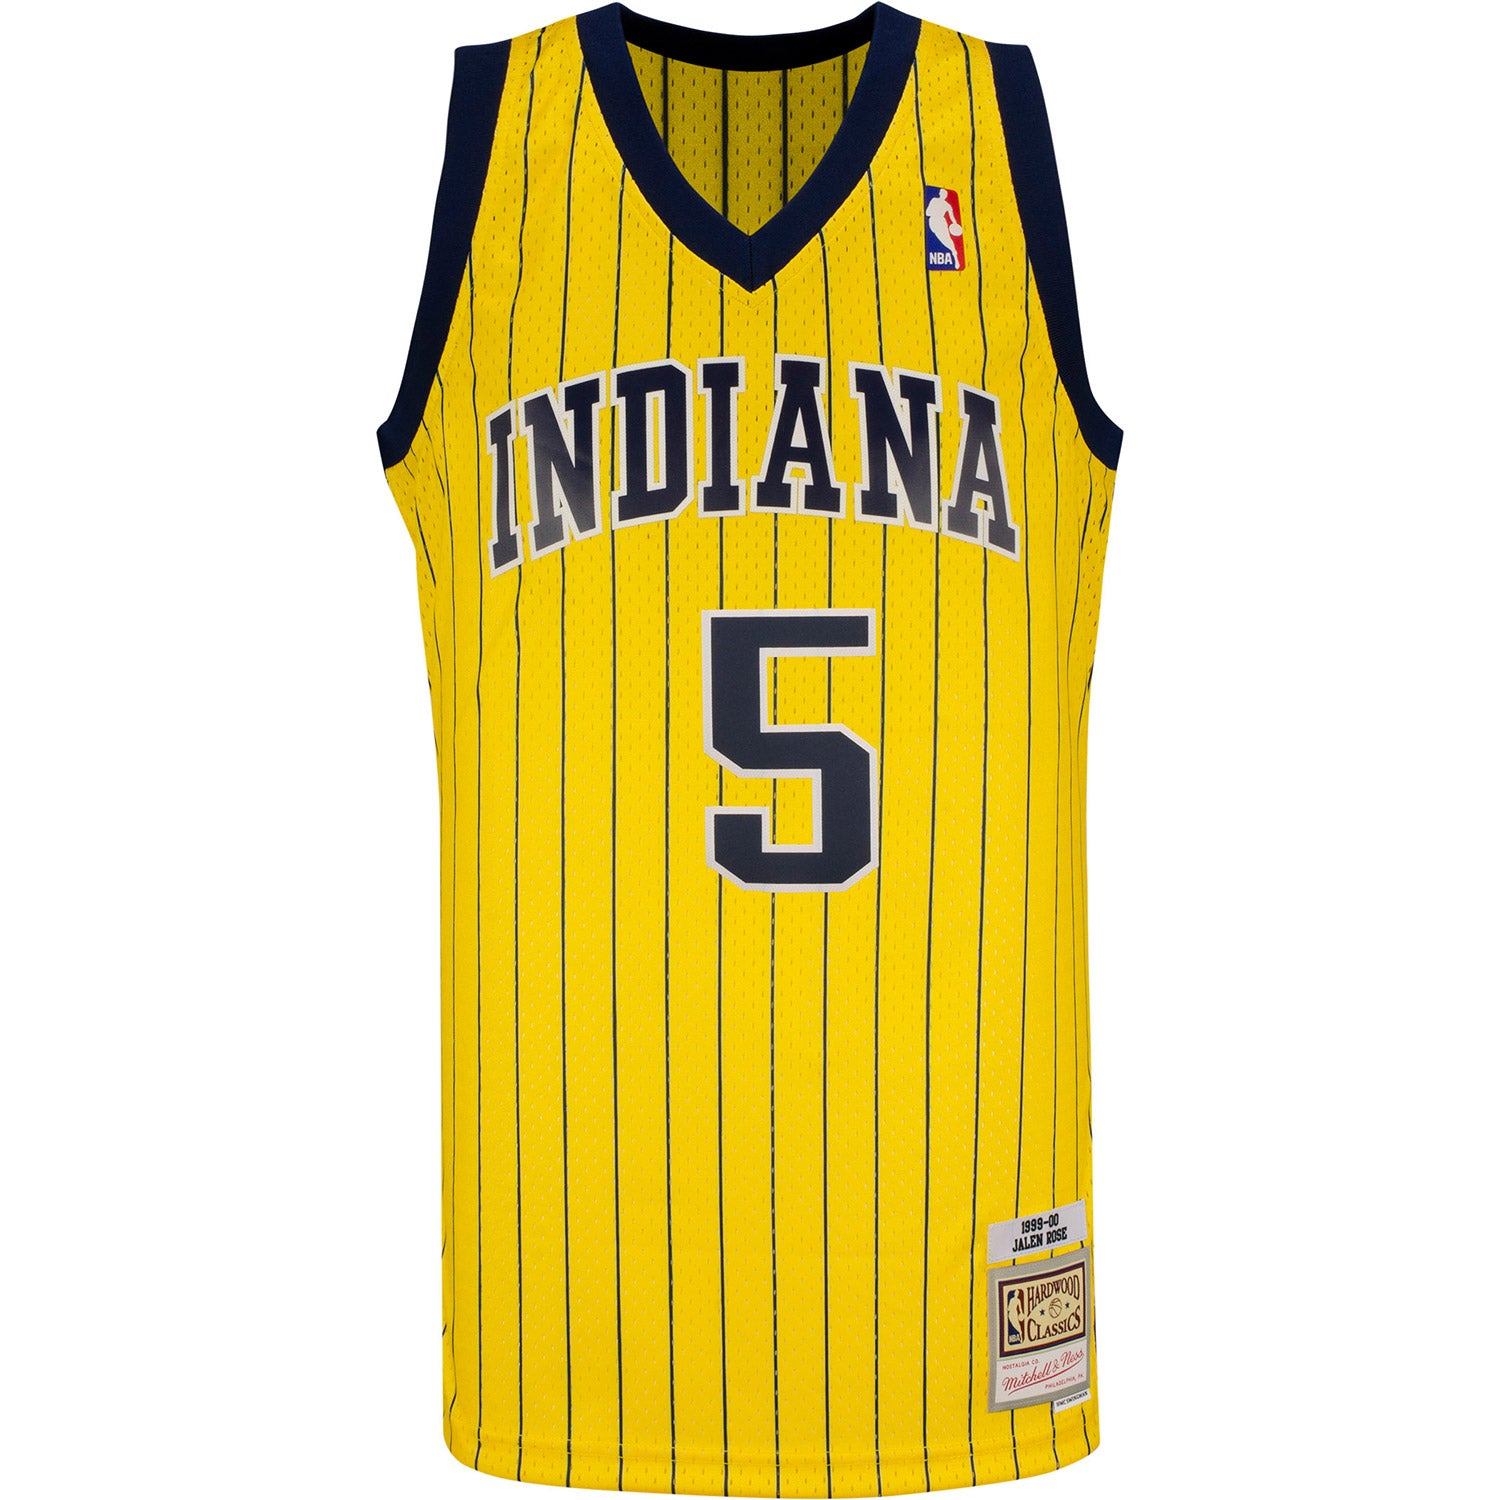 Adult Indiana Pacers Rik Smits #45 Flo-Jo Hardwood Classic Jersey by M